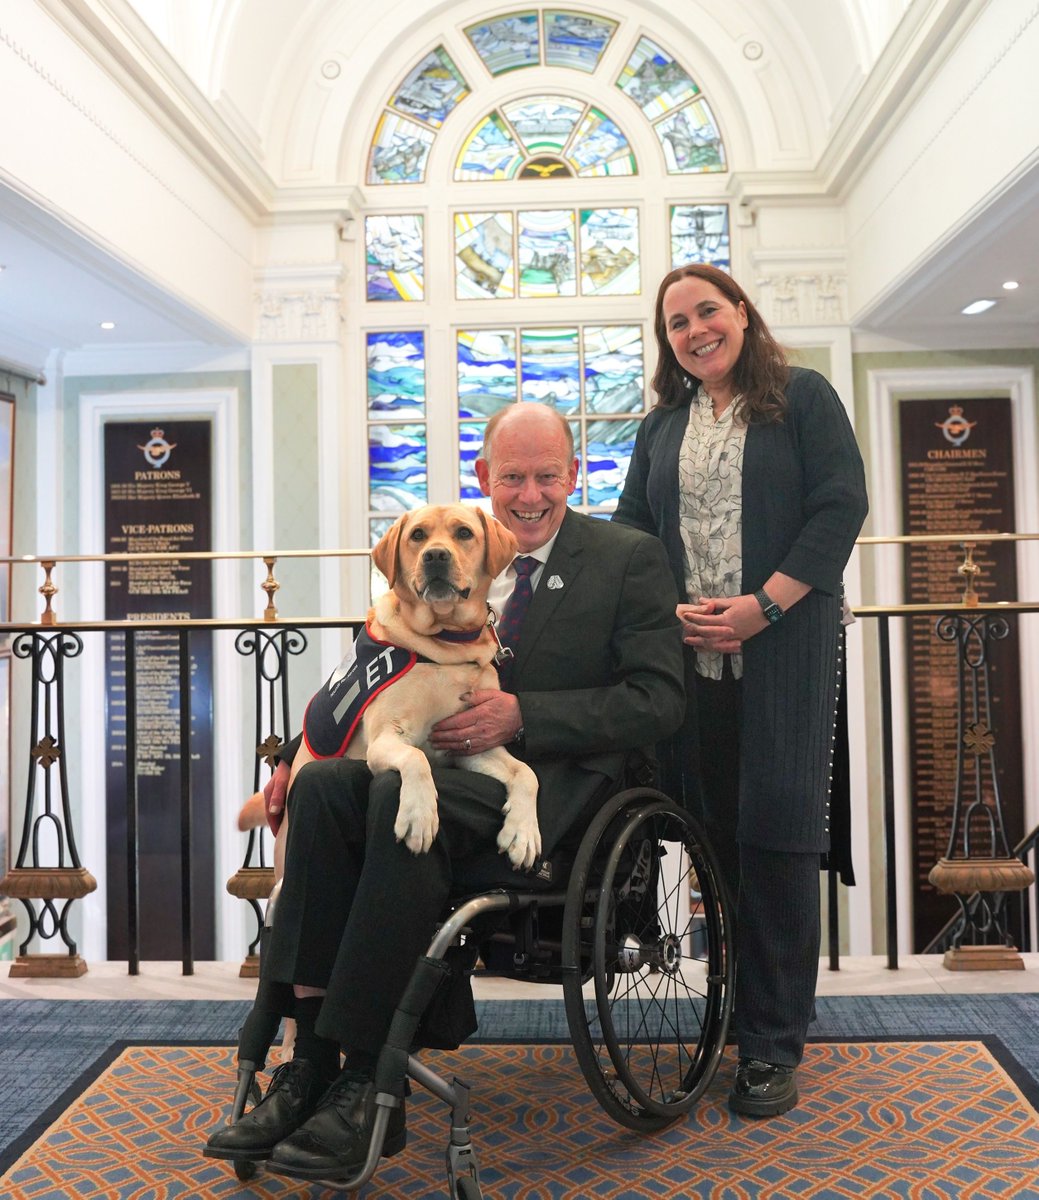 The RAF Club were pleased to welcome Allen Parton and his wonderful assistance dog ET to Royal Air Force Club last night for a fascinating Club Talk about Allen's incredible story and the Charity. @houndsforheroes #HoundsforHeroes #RoyalAirForceClub